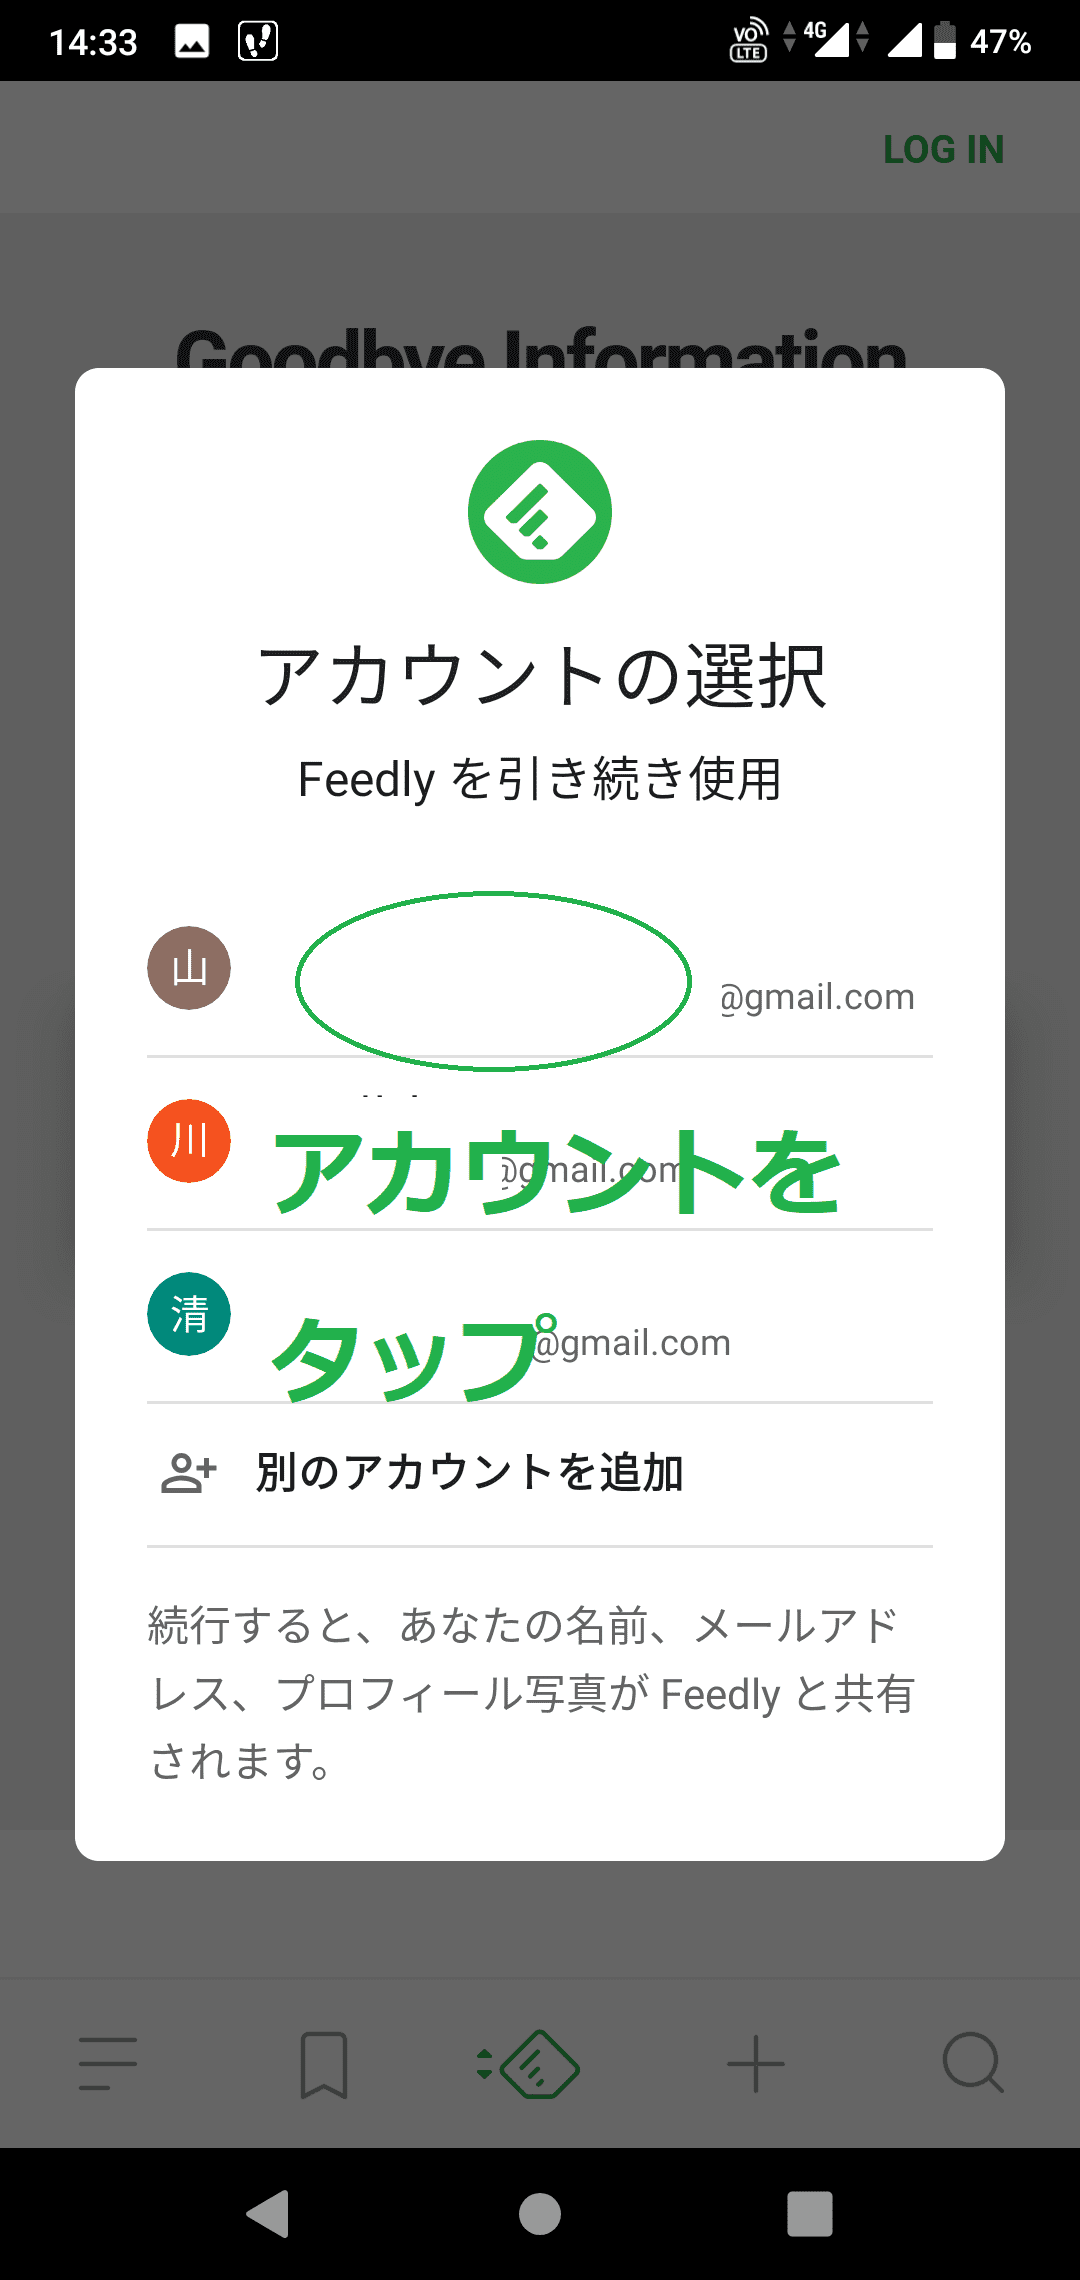 Feedly解説イメージ003